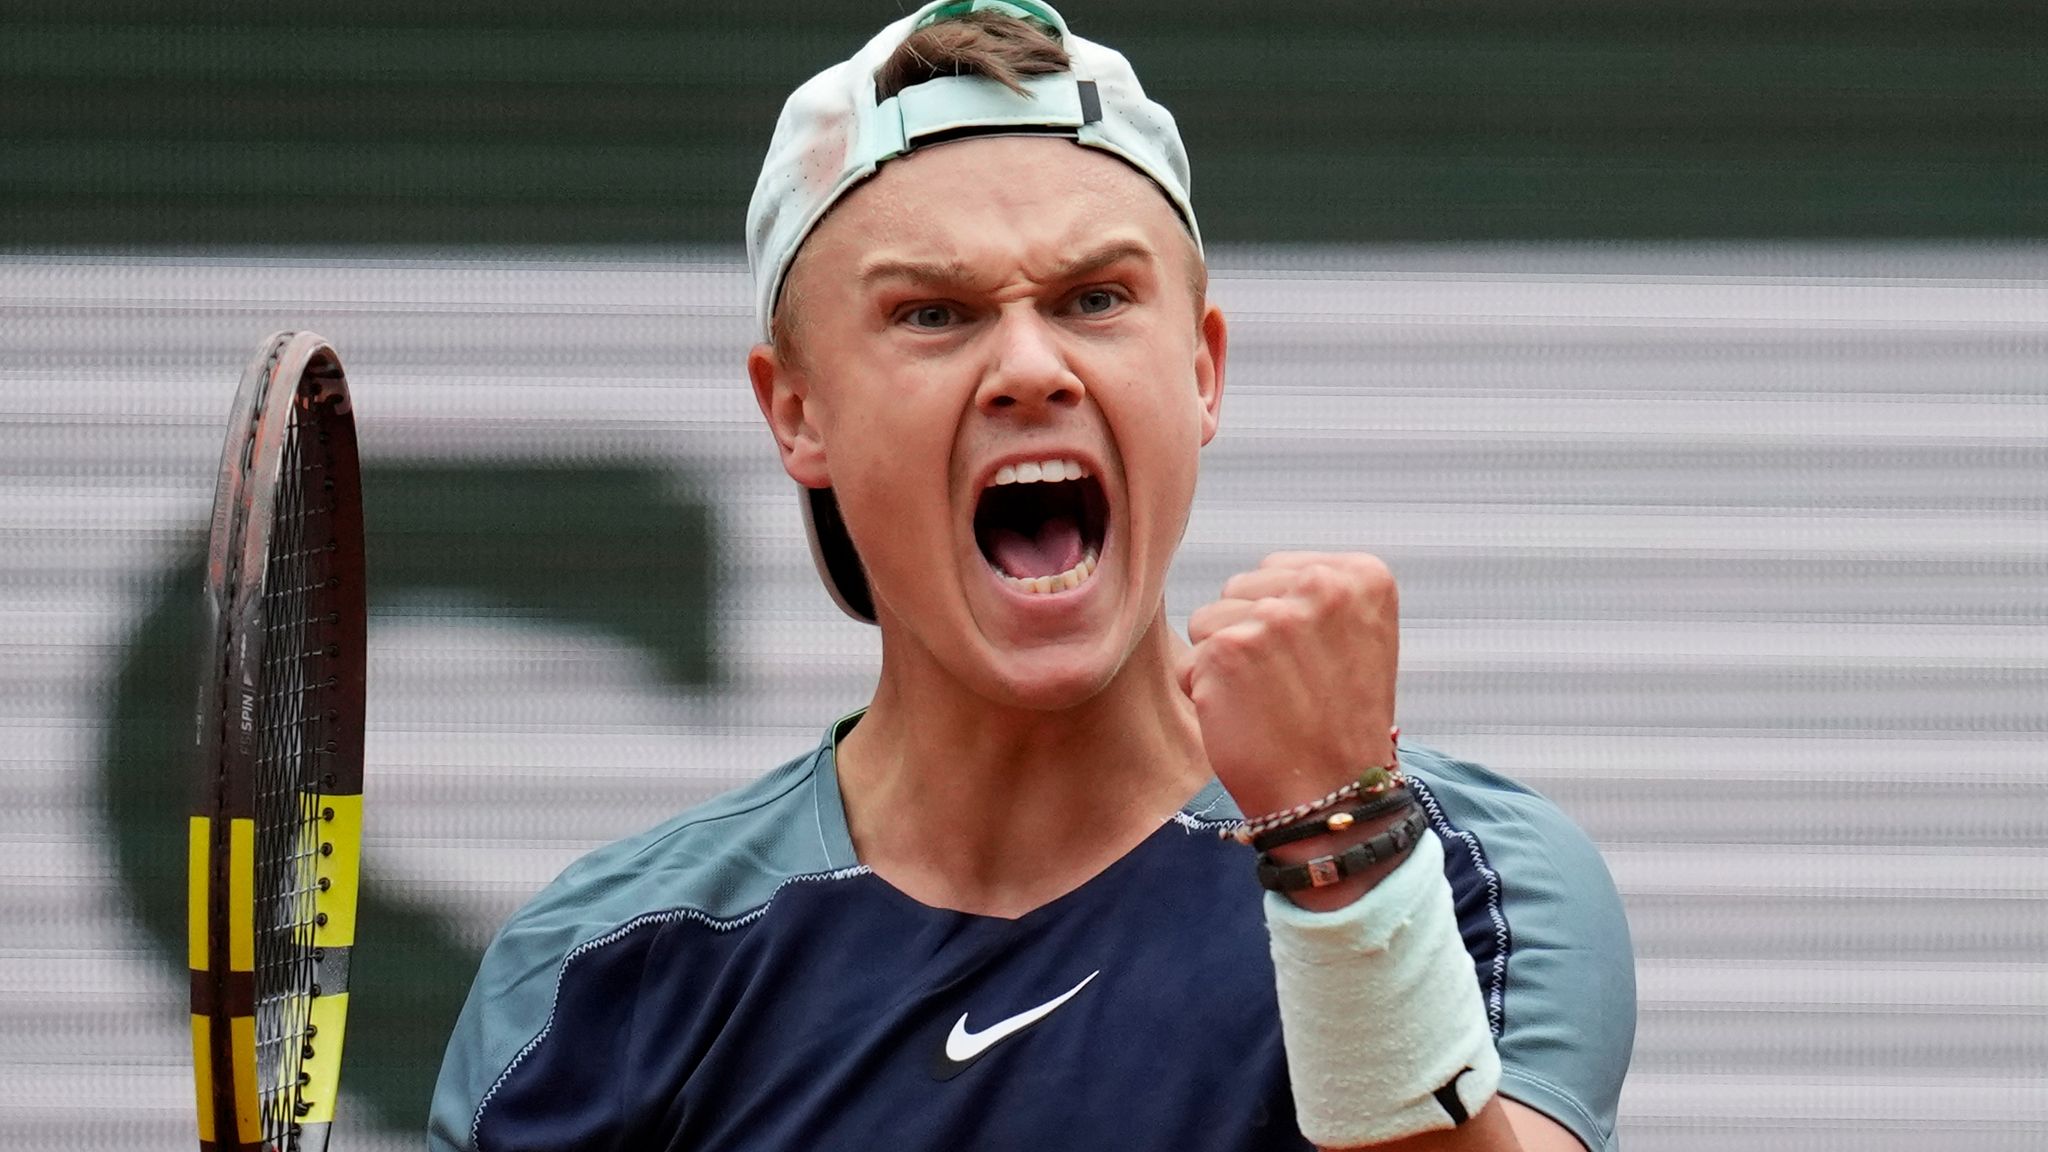 French Open Stefanos Tsitsipas knocked out by Danish teenager Holger